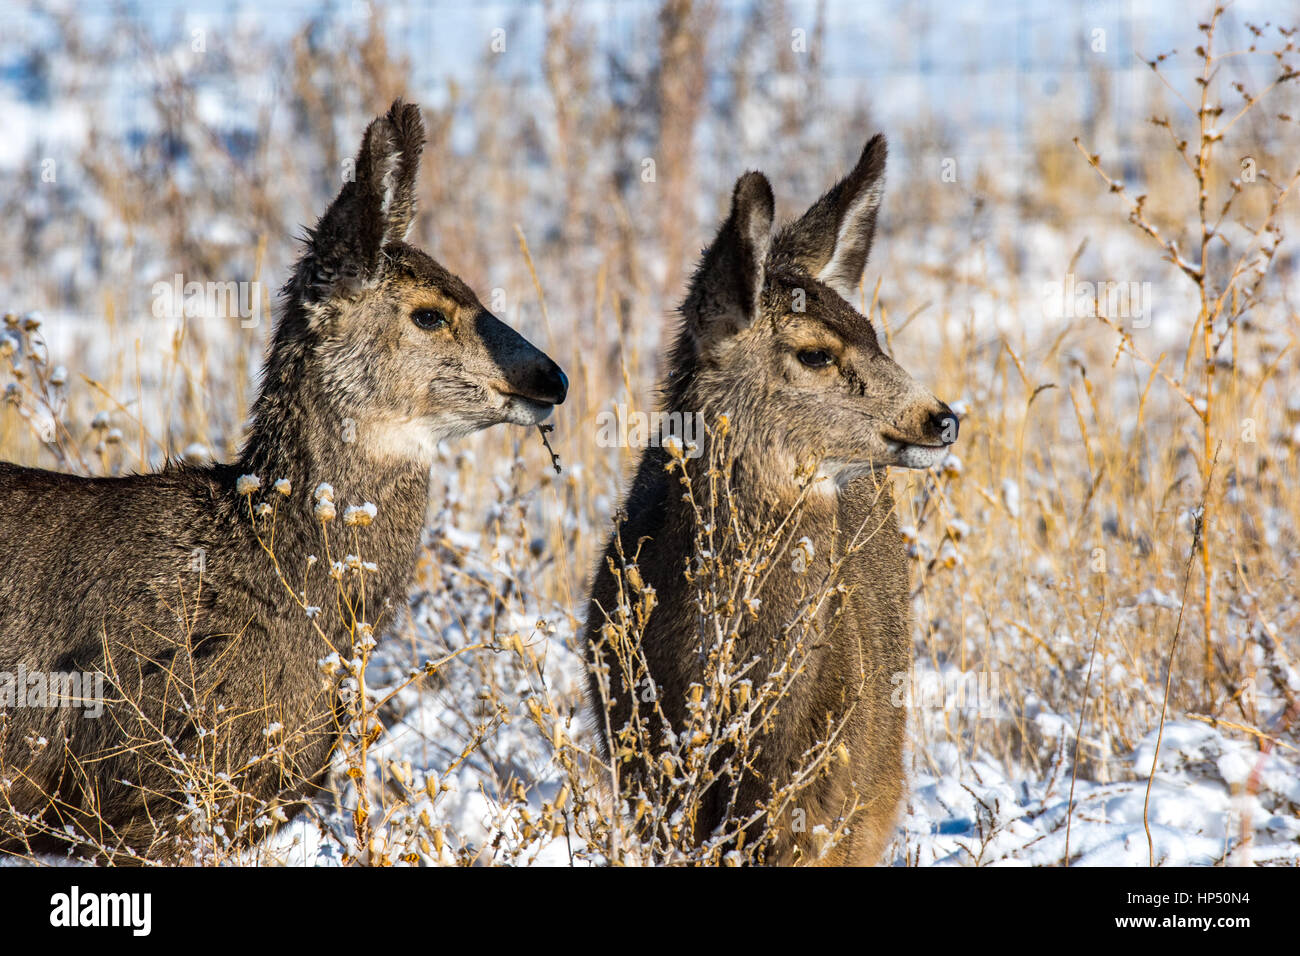 Young Mule Deer Fawns Alertly Observing Stock Photo